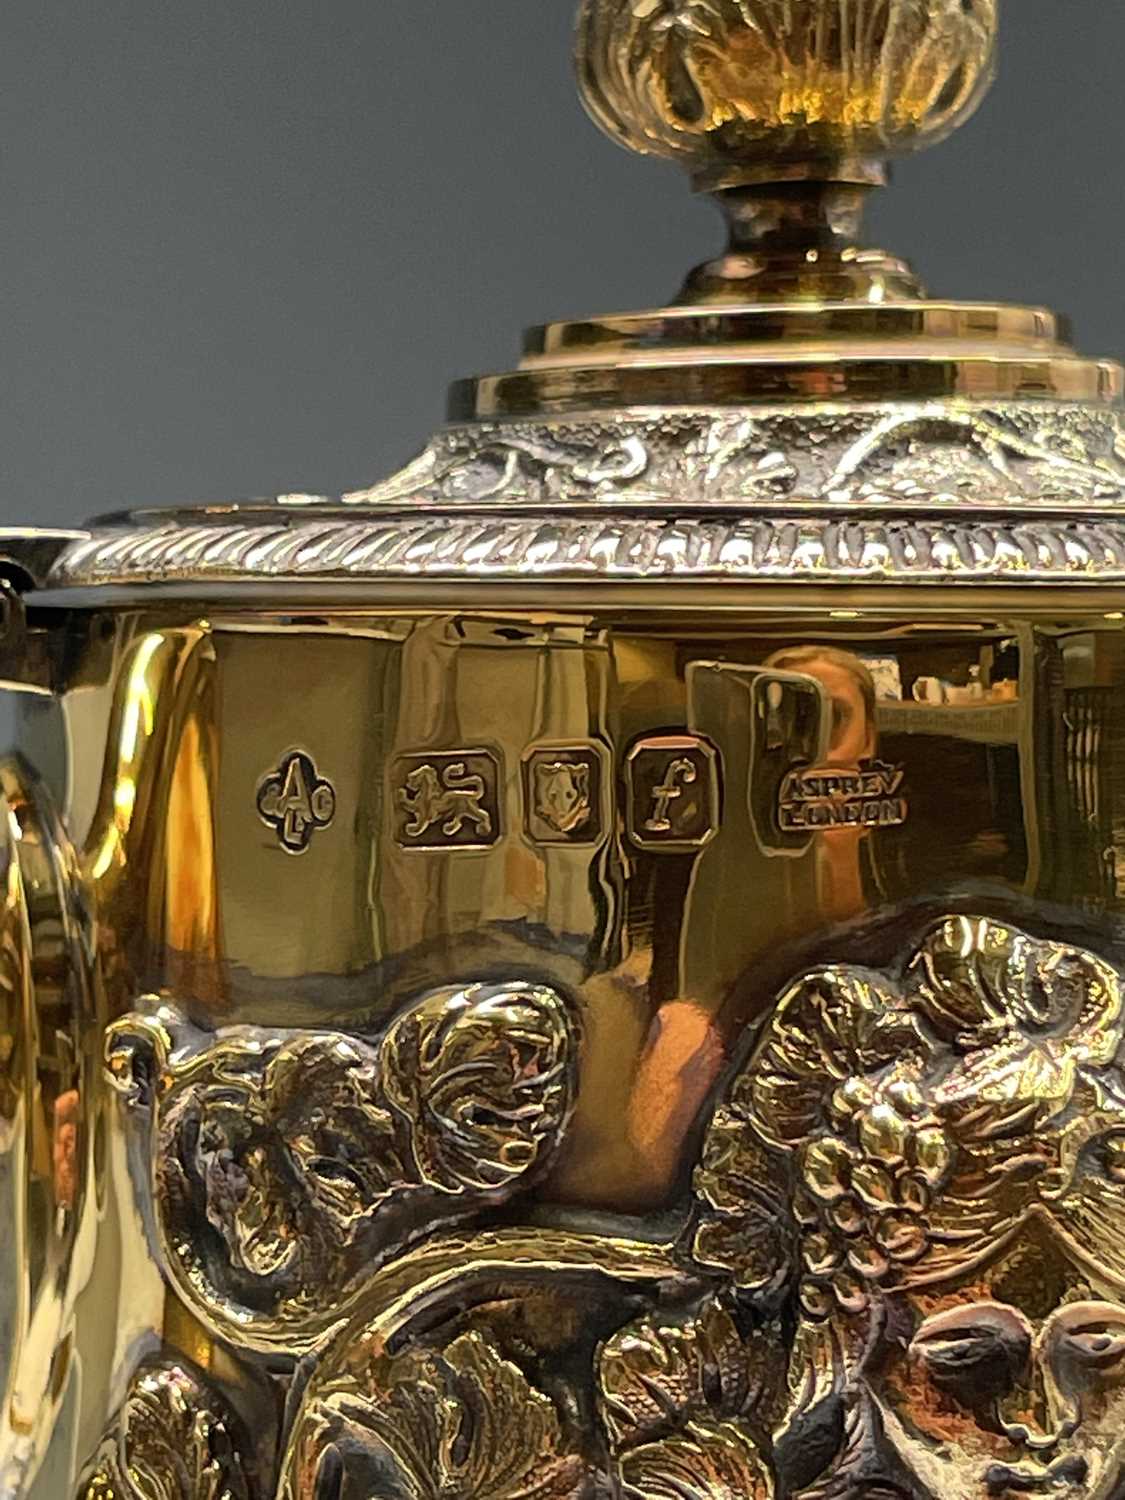 An Asprey claret jug the glass body cut and engraved with vines the silver-gilt mount with - Image 4 of 16